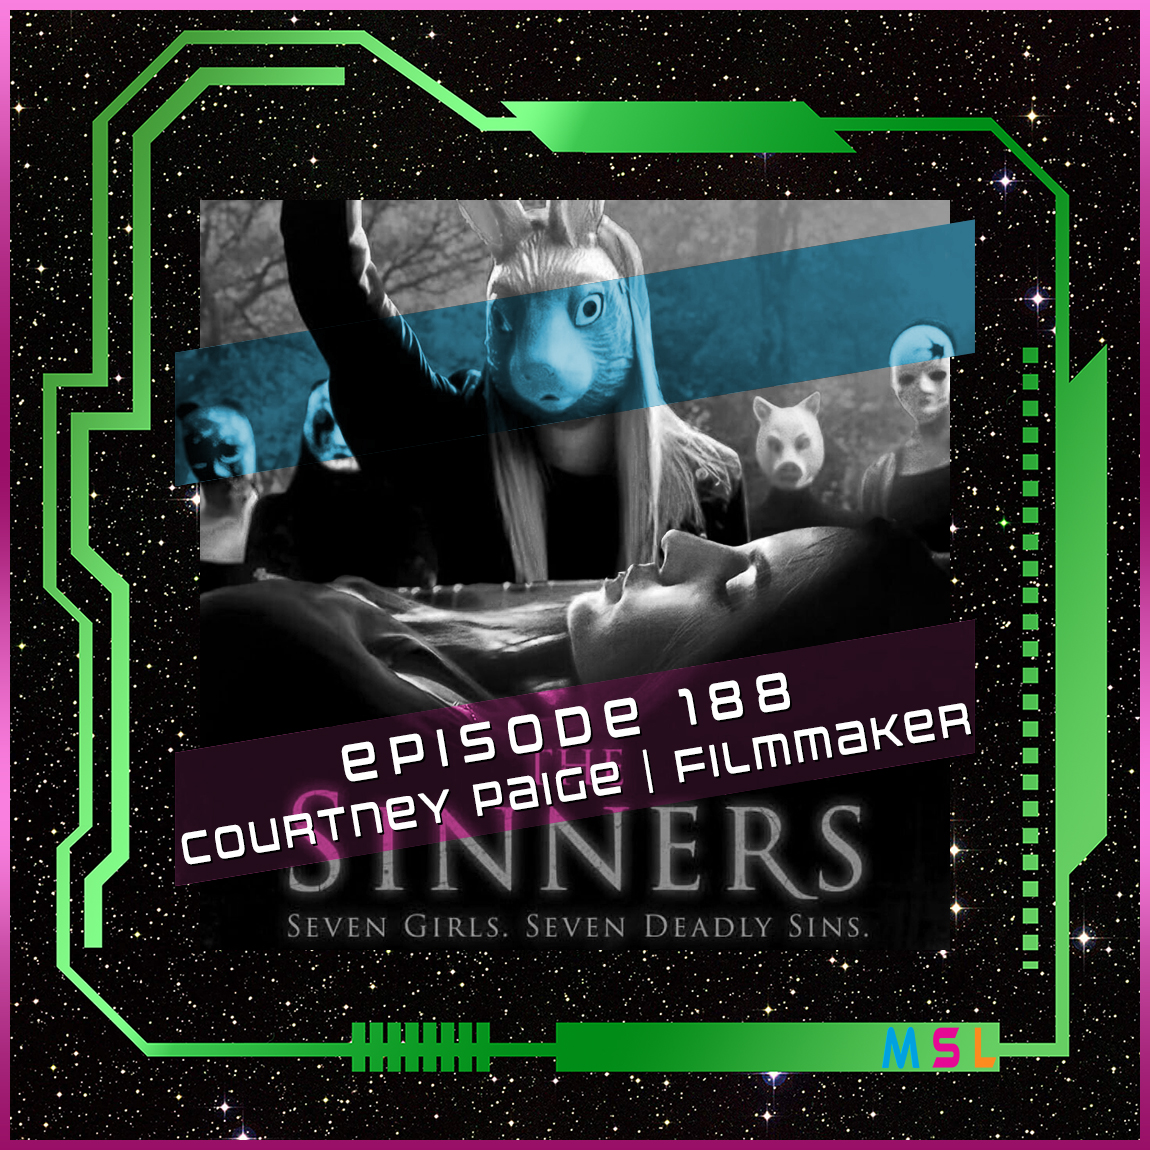 188 | Courtney Paige (The Sinners)